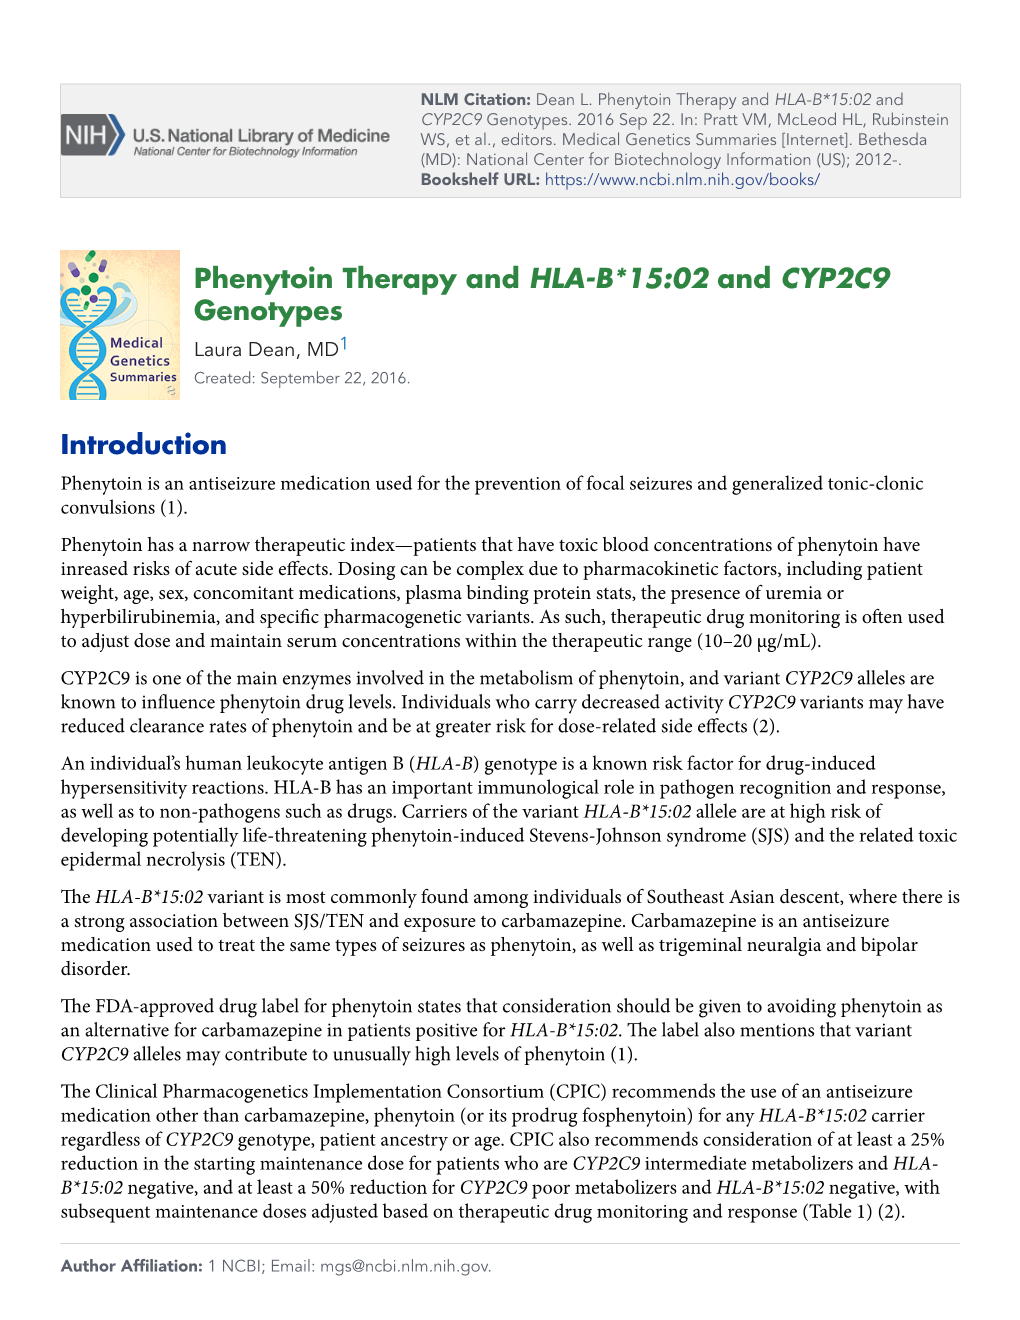 Phenytoin Therapy and HLA-B*15:02 and CYP2C9 Genotypes